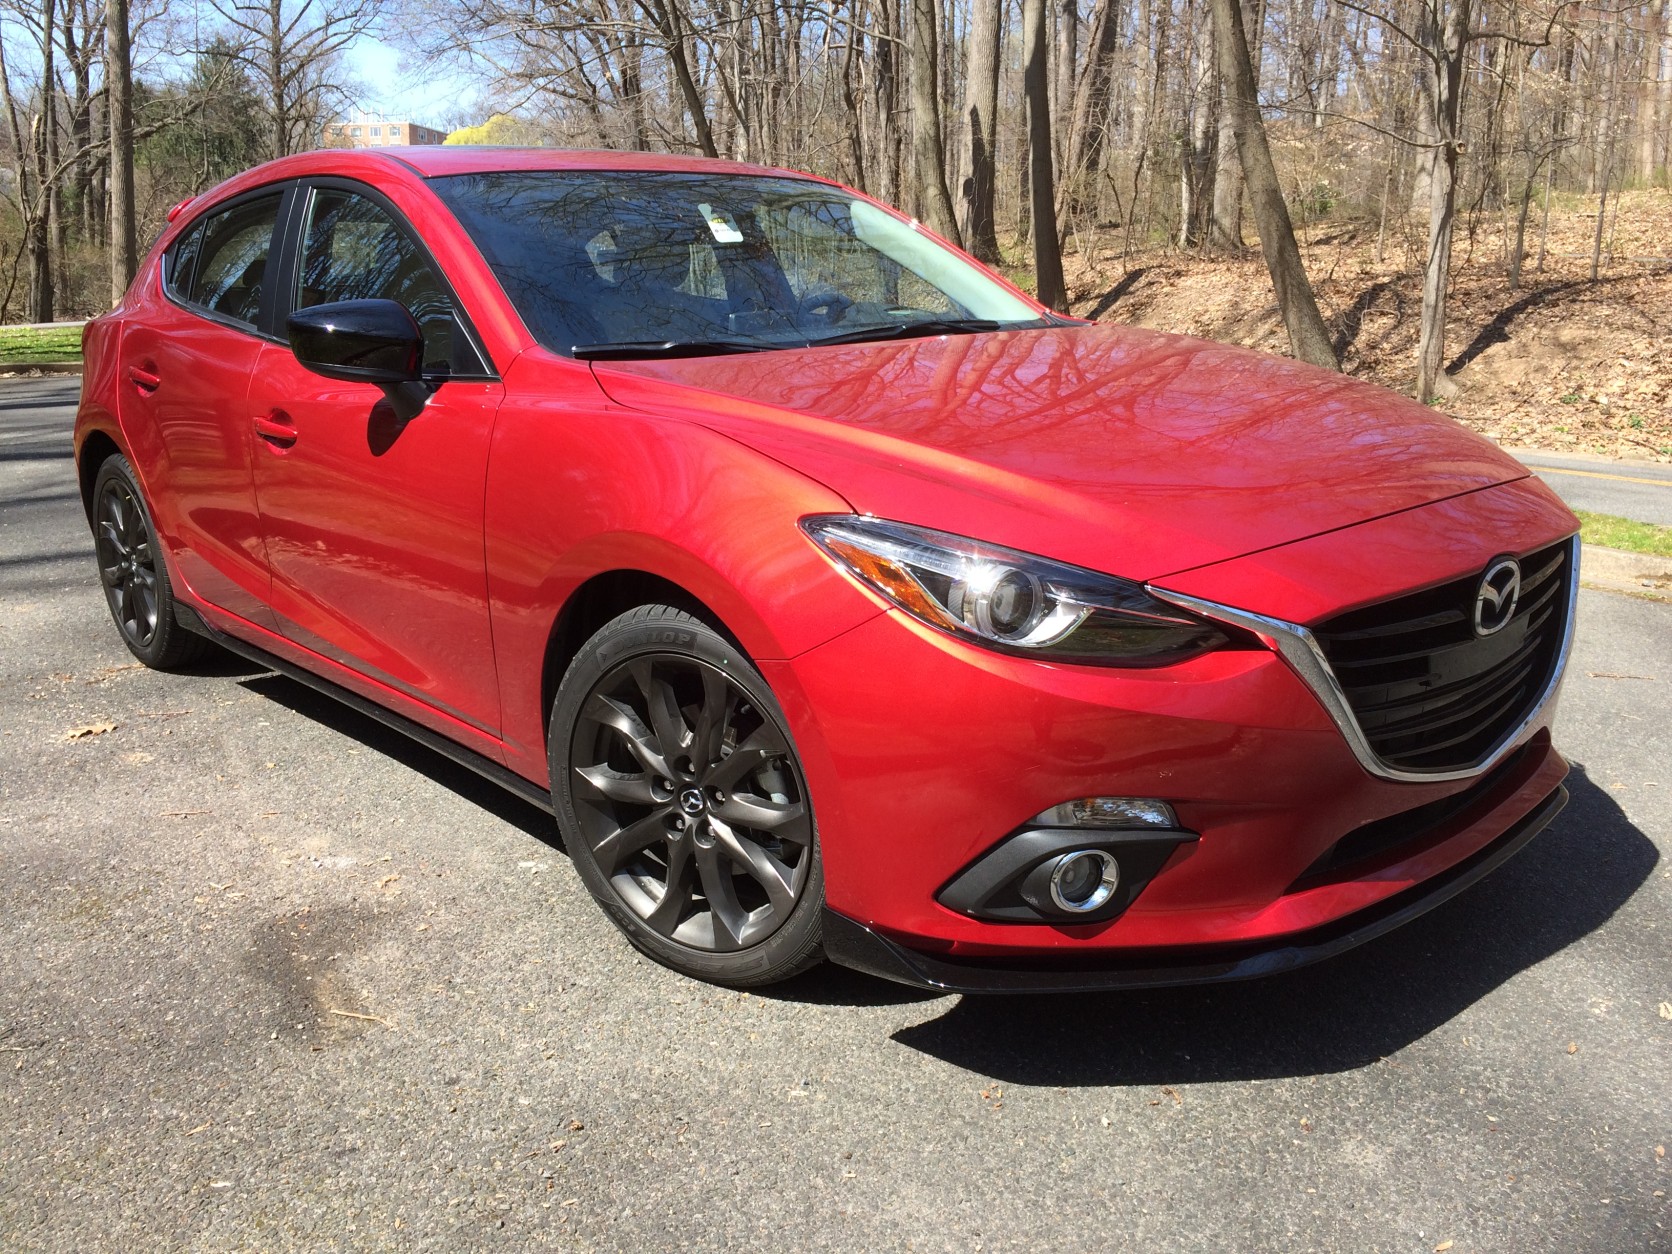 2016 Mazda 3 Grand Touring A hatchback that’s fun to drive WTOP News